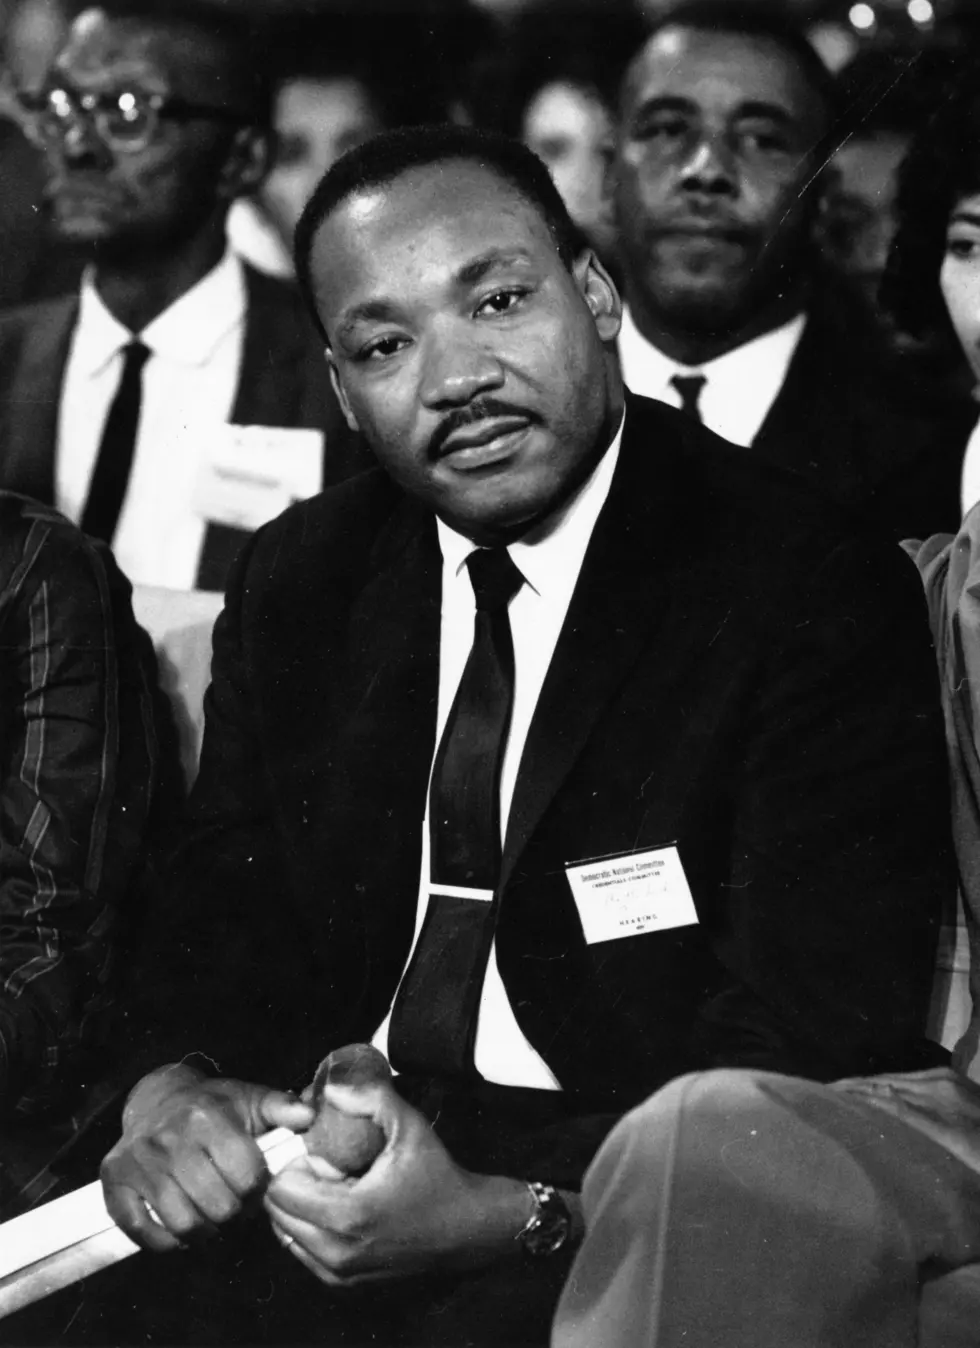 Remembering Dr. Martin Luther King Jr. [VIDEO]